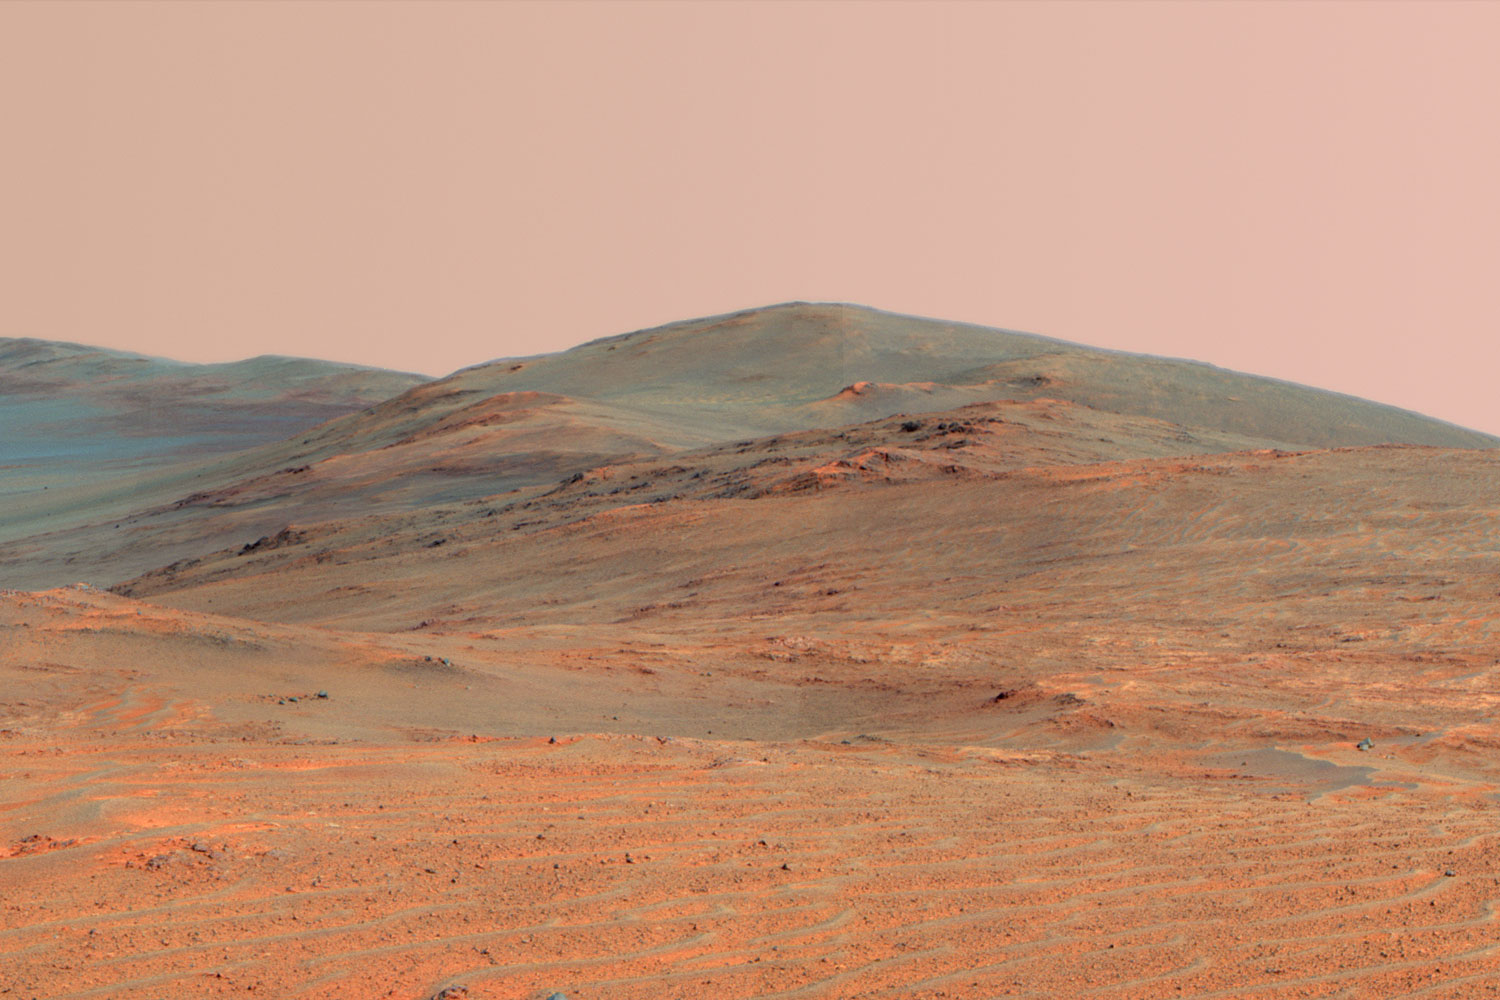 This vista of the Endeavour Crater rim taken by Opportunity Rover combines several exposures taken by the rover's panoramic camera (Pancam) on the 3,637th Martian day, or sol, of the mission on April 18, 2014 and was released on May 19, 2014.